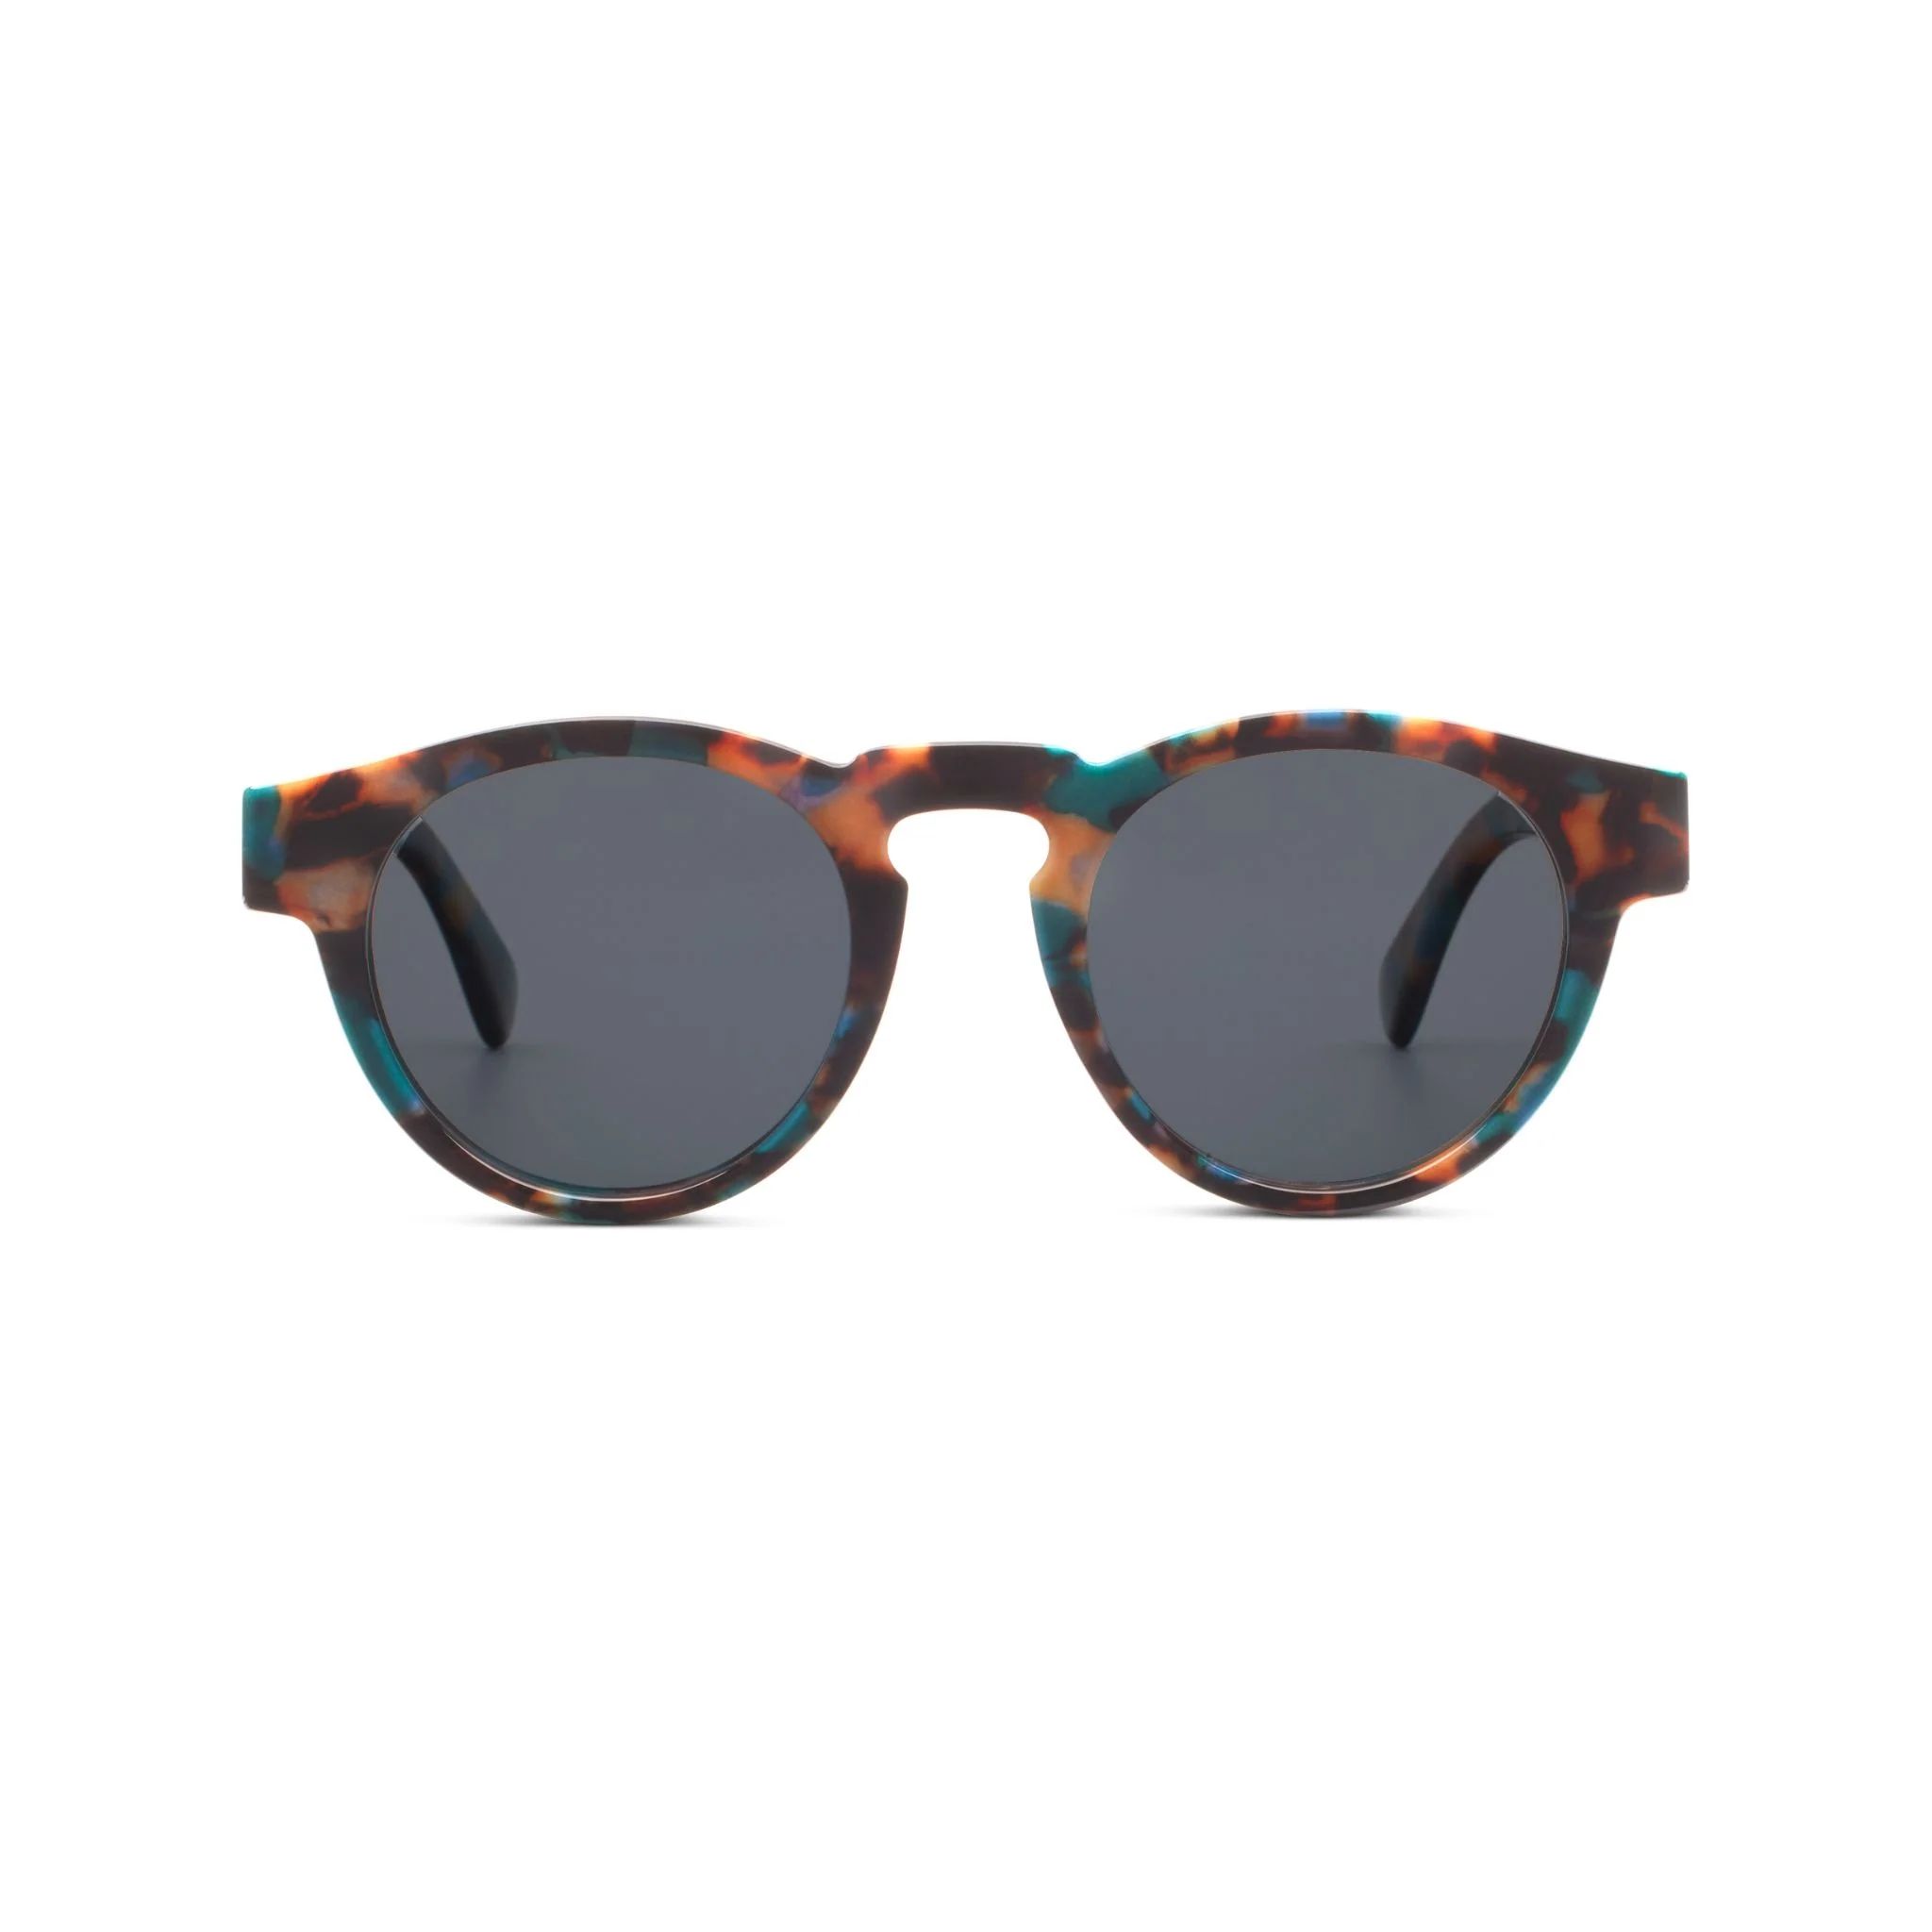 Nantucket - Teal Botanico / No Correction / None - Peepers by PeeperSpecs | Peepers